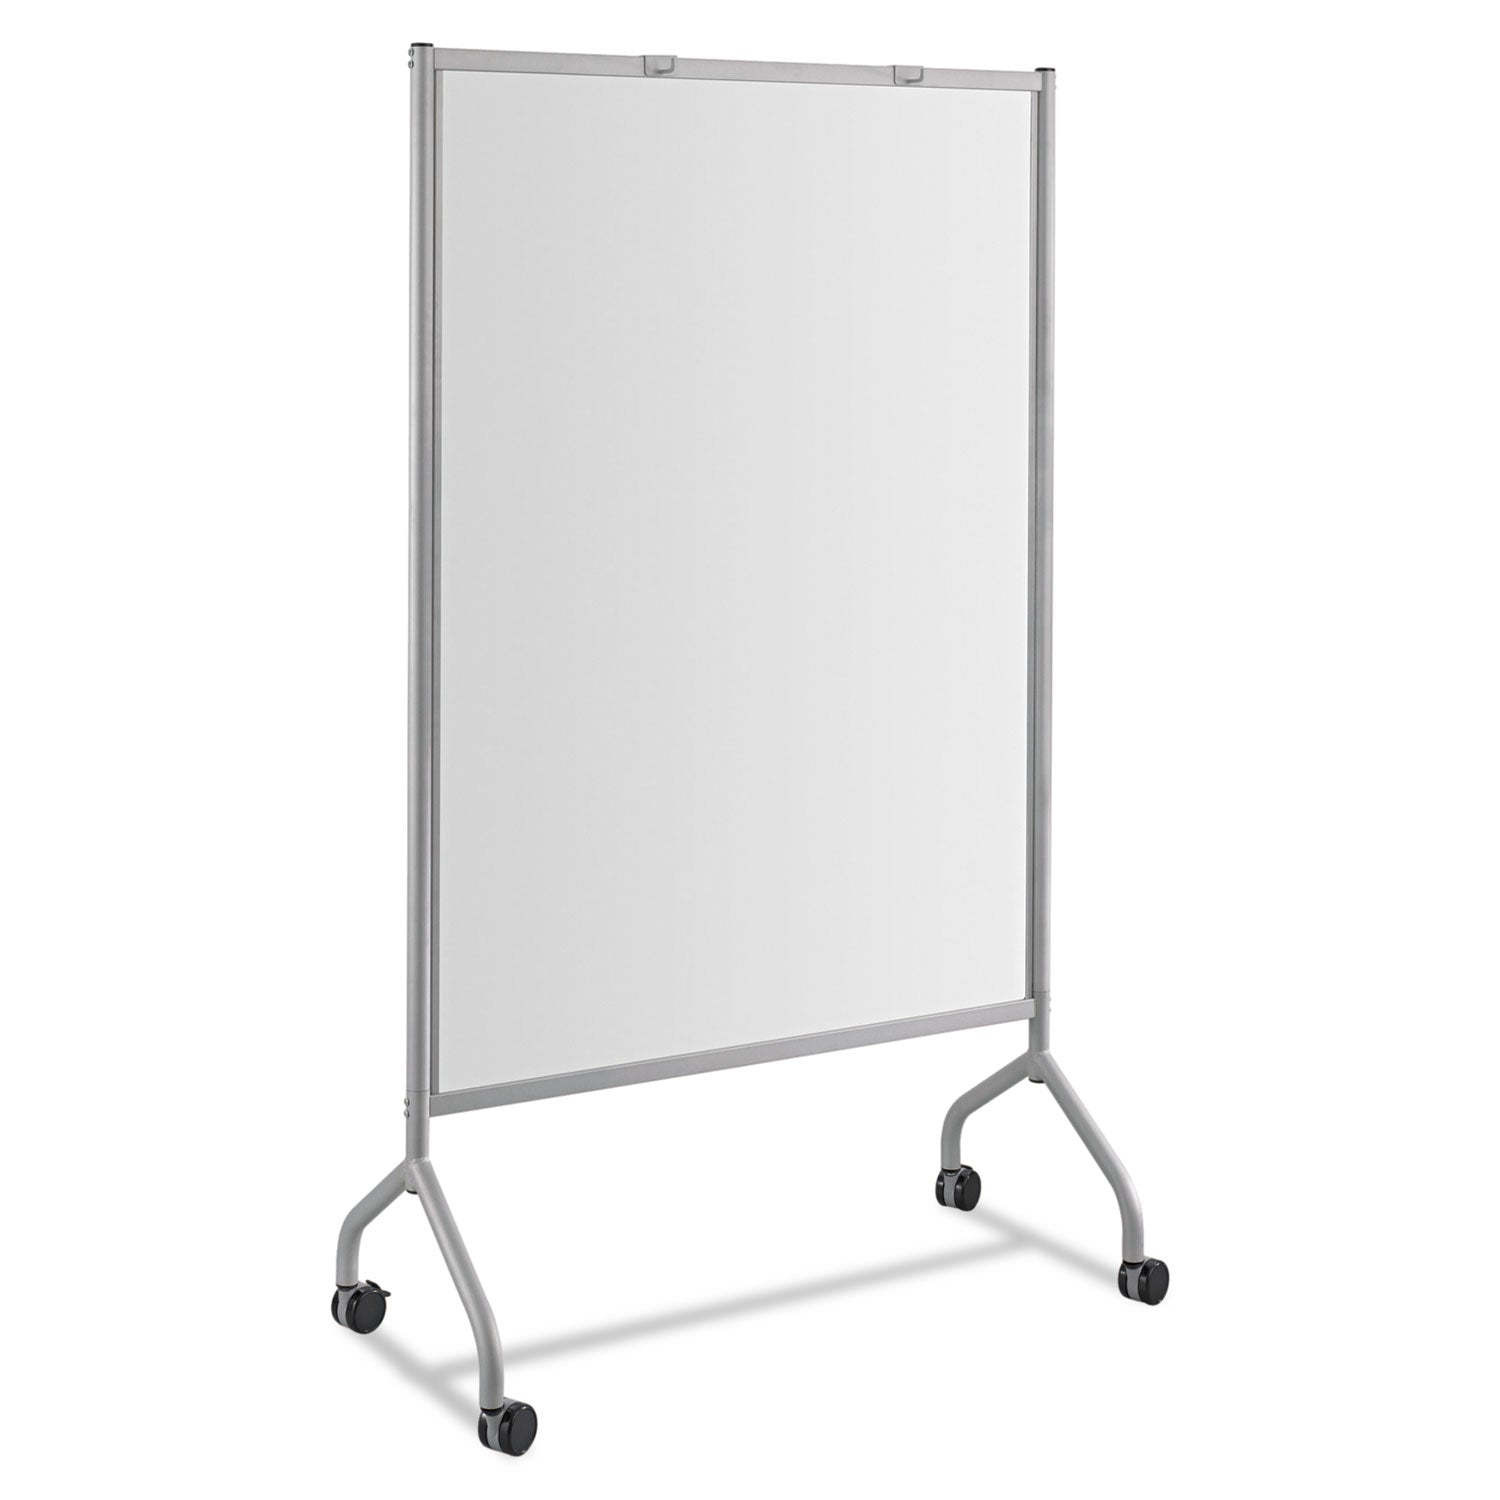 Impromptu Magnetic Whiteboard Collaboration Screen, 42w x 21.5d x 72h, Gray/White - 